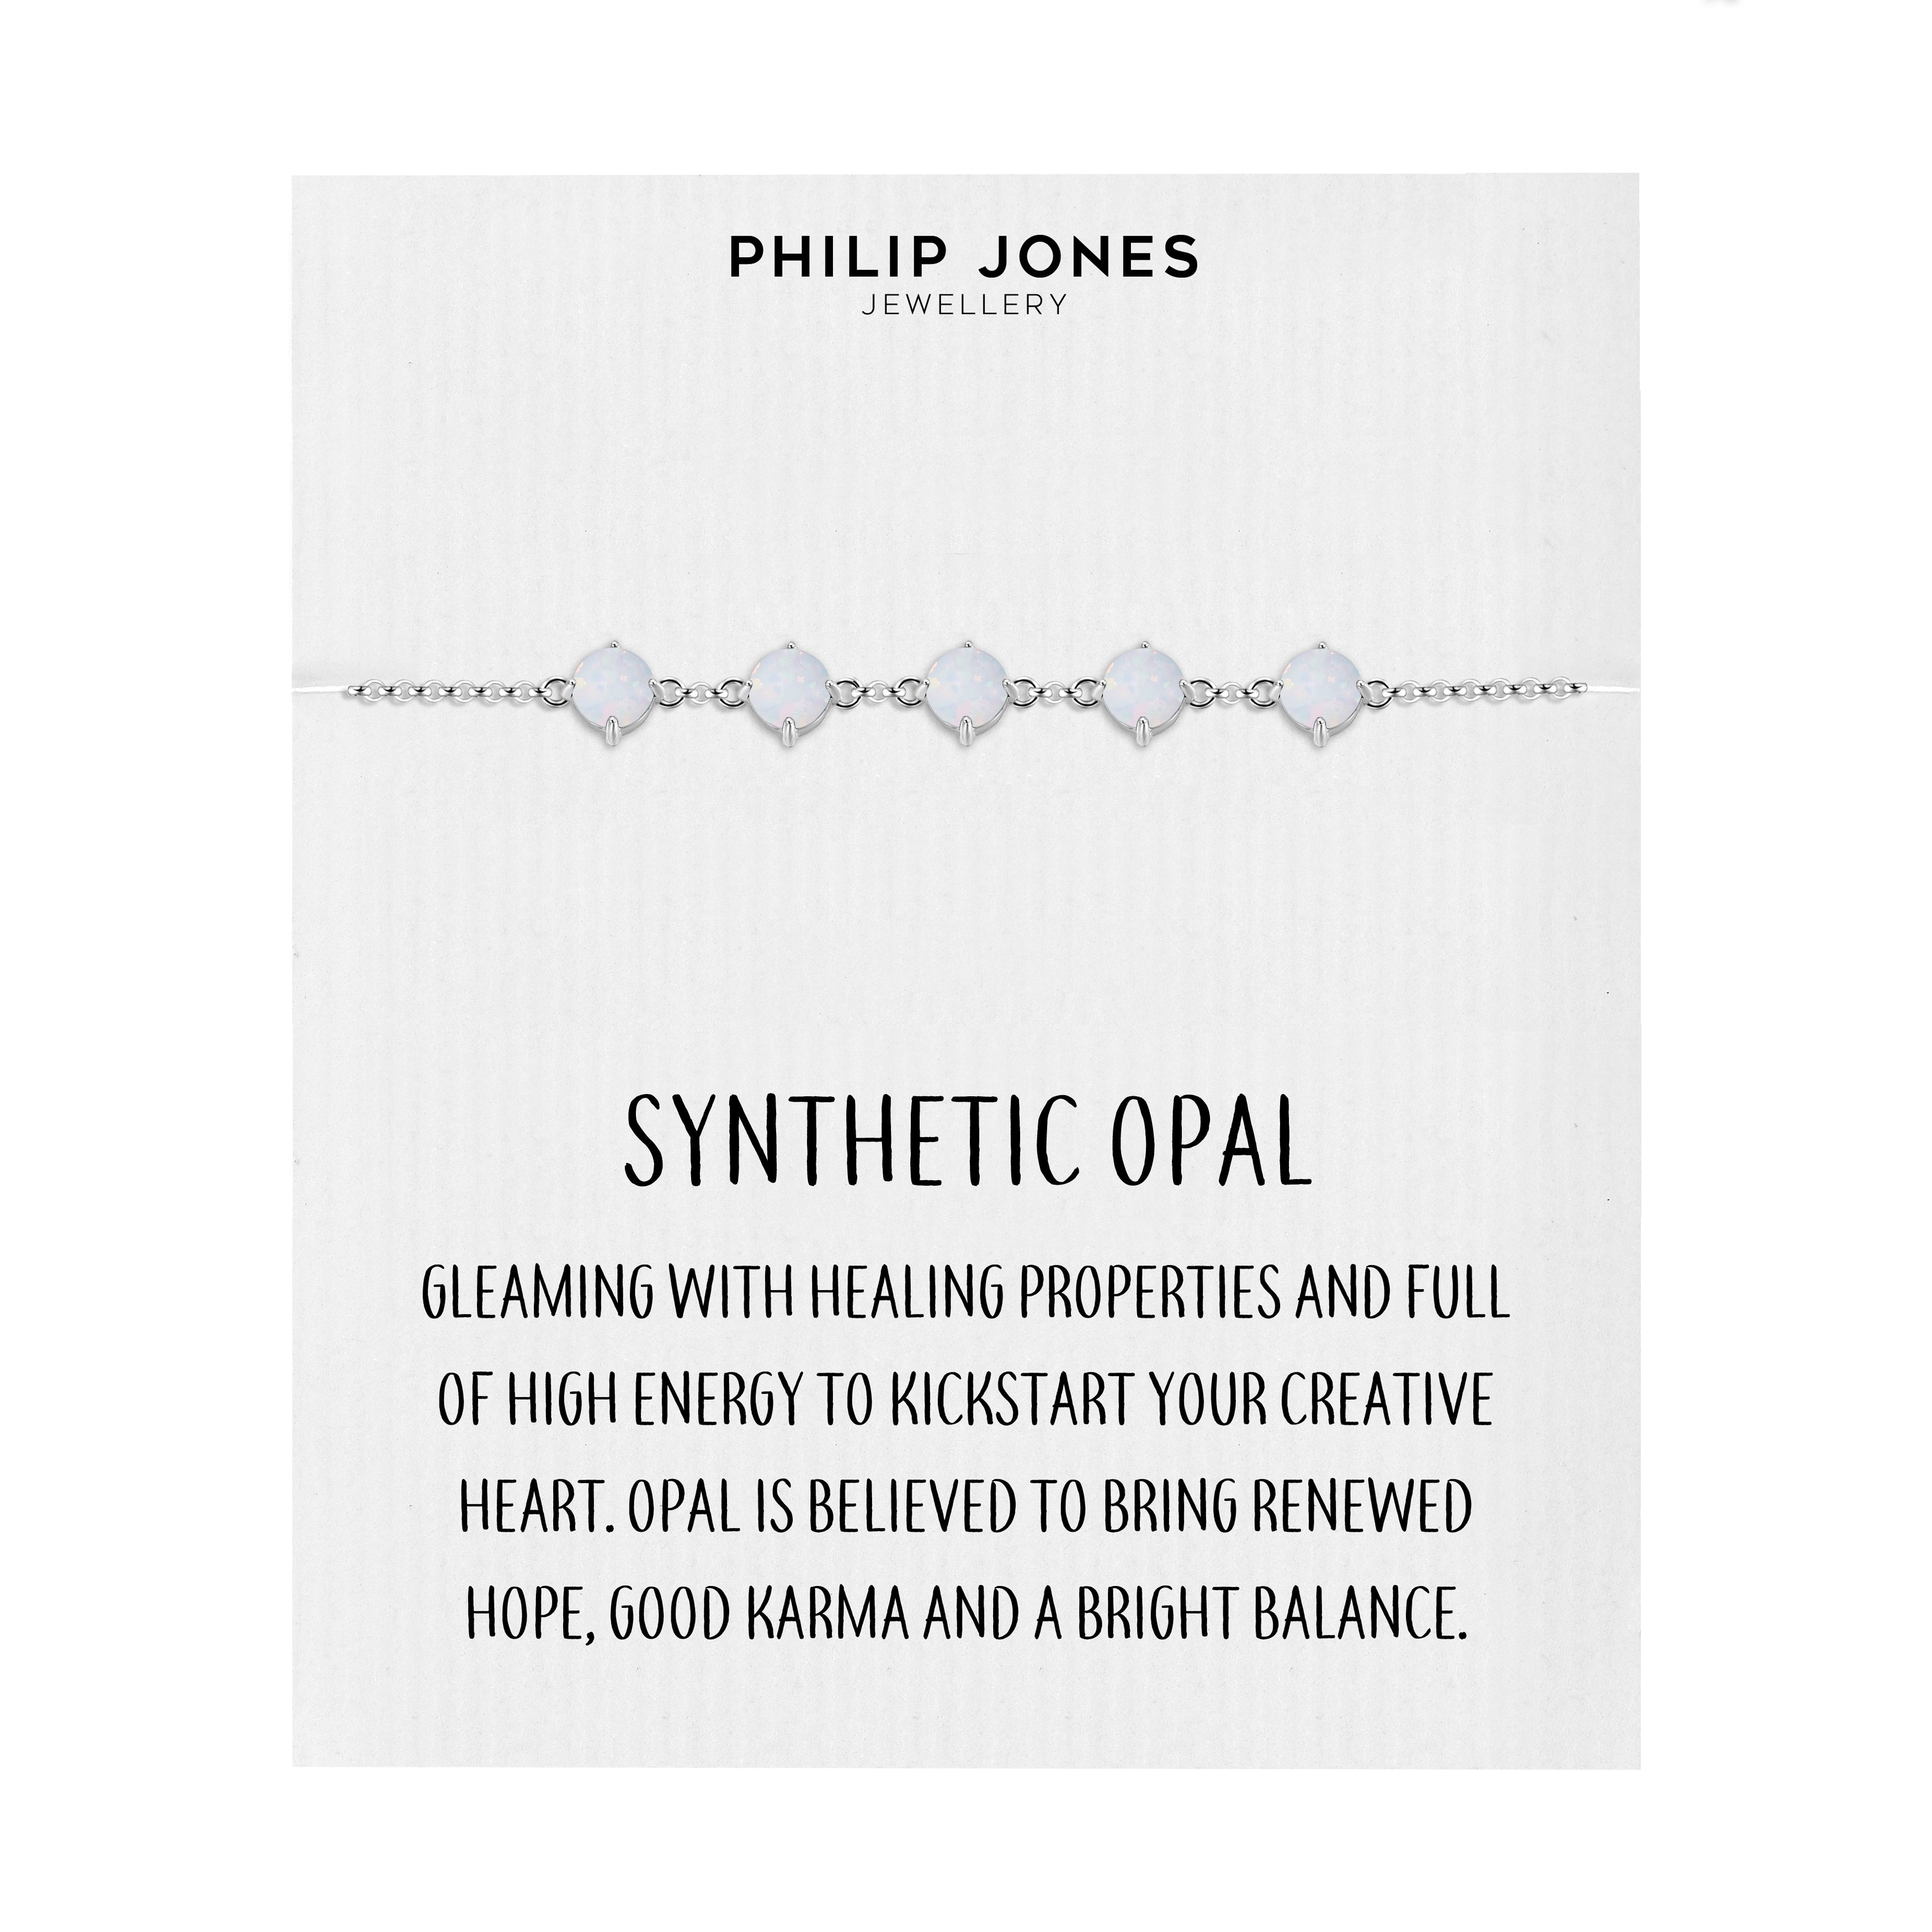 Synthetic White Opal Gemstone Bracelet with Quote Card by Philip Jones Jewellery